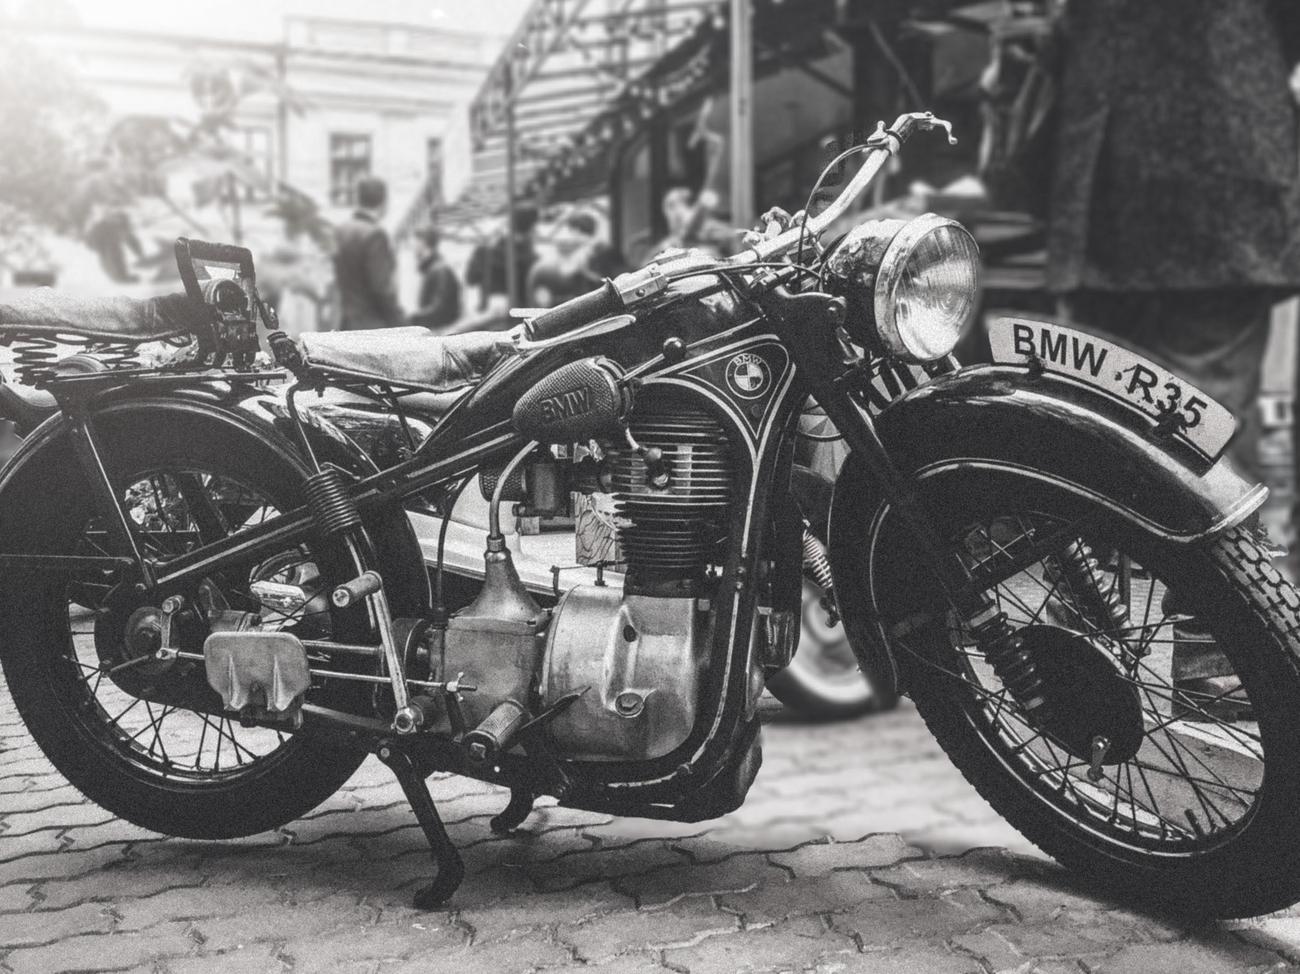 facts about old motorcycles